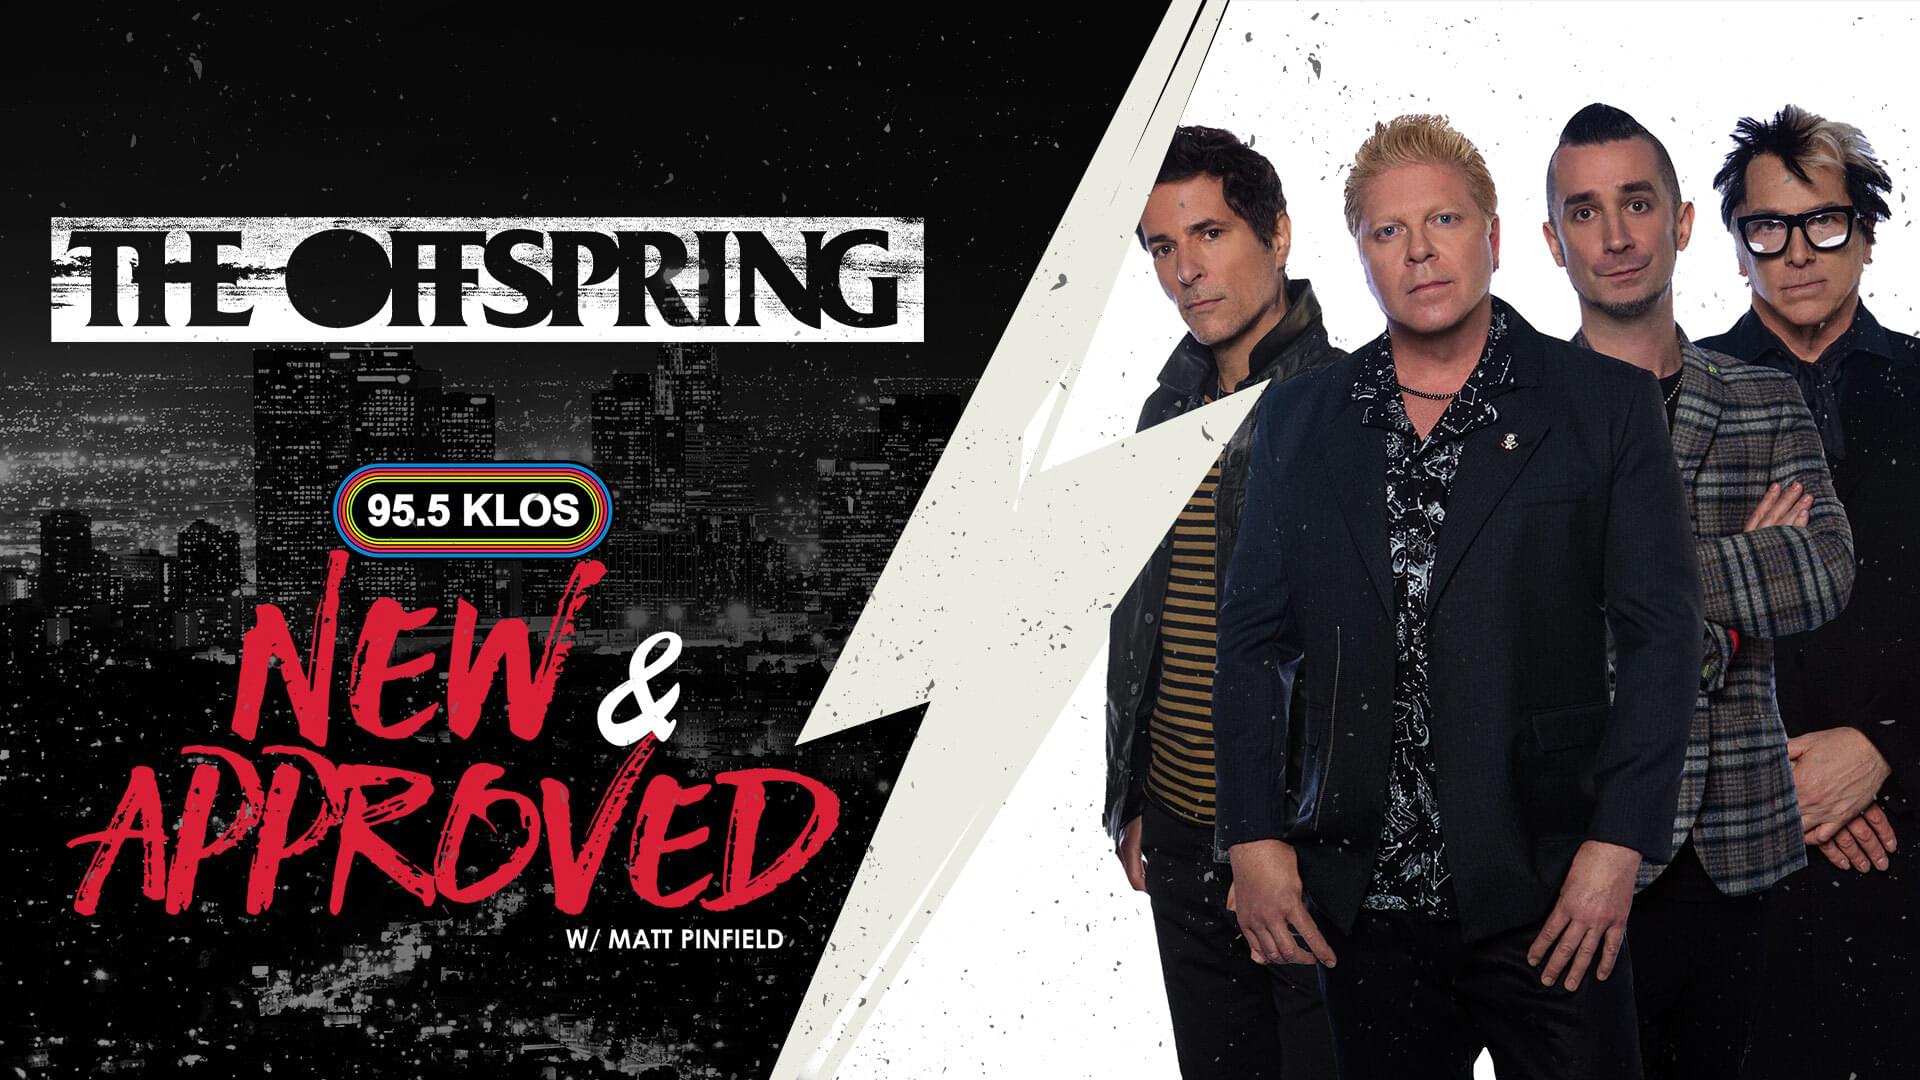 The Offspring Address Effects Of Pandemic On New Album + Volunteer Work For Chronic Illness Patients